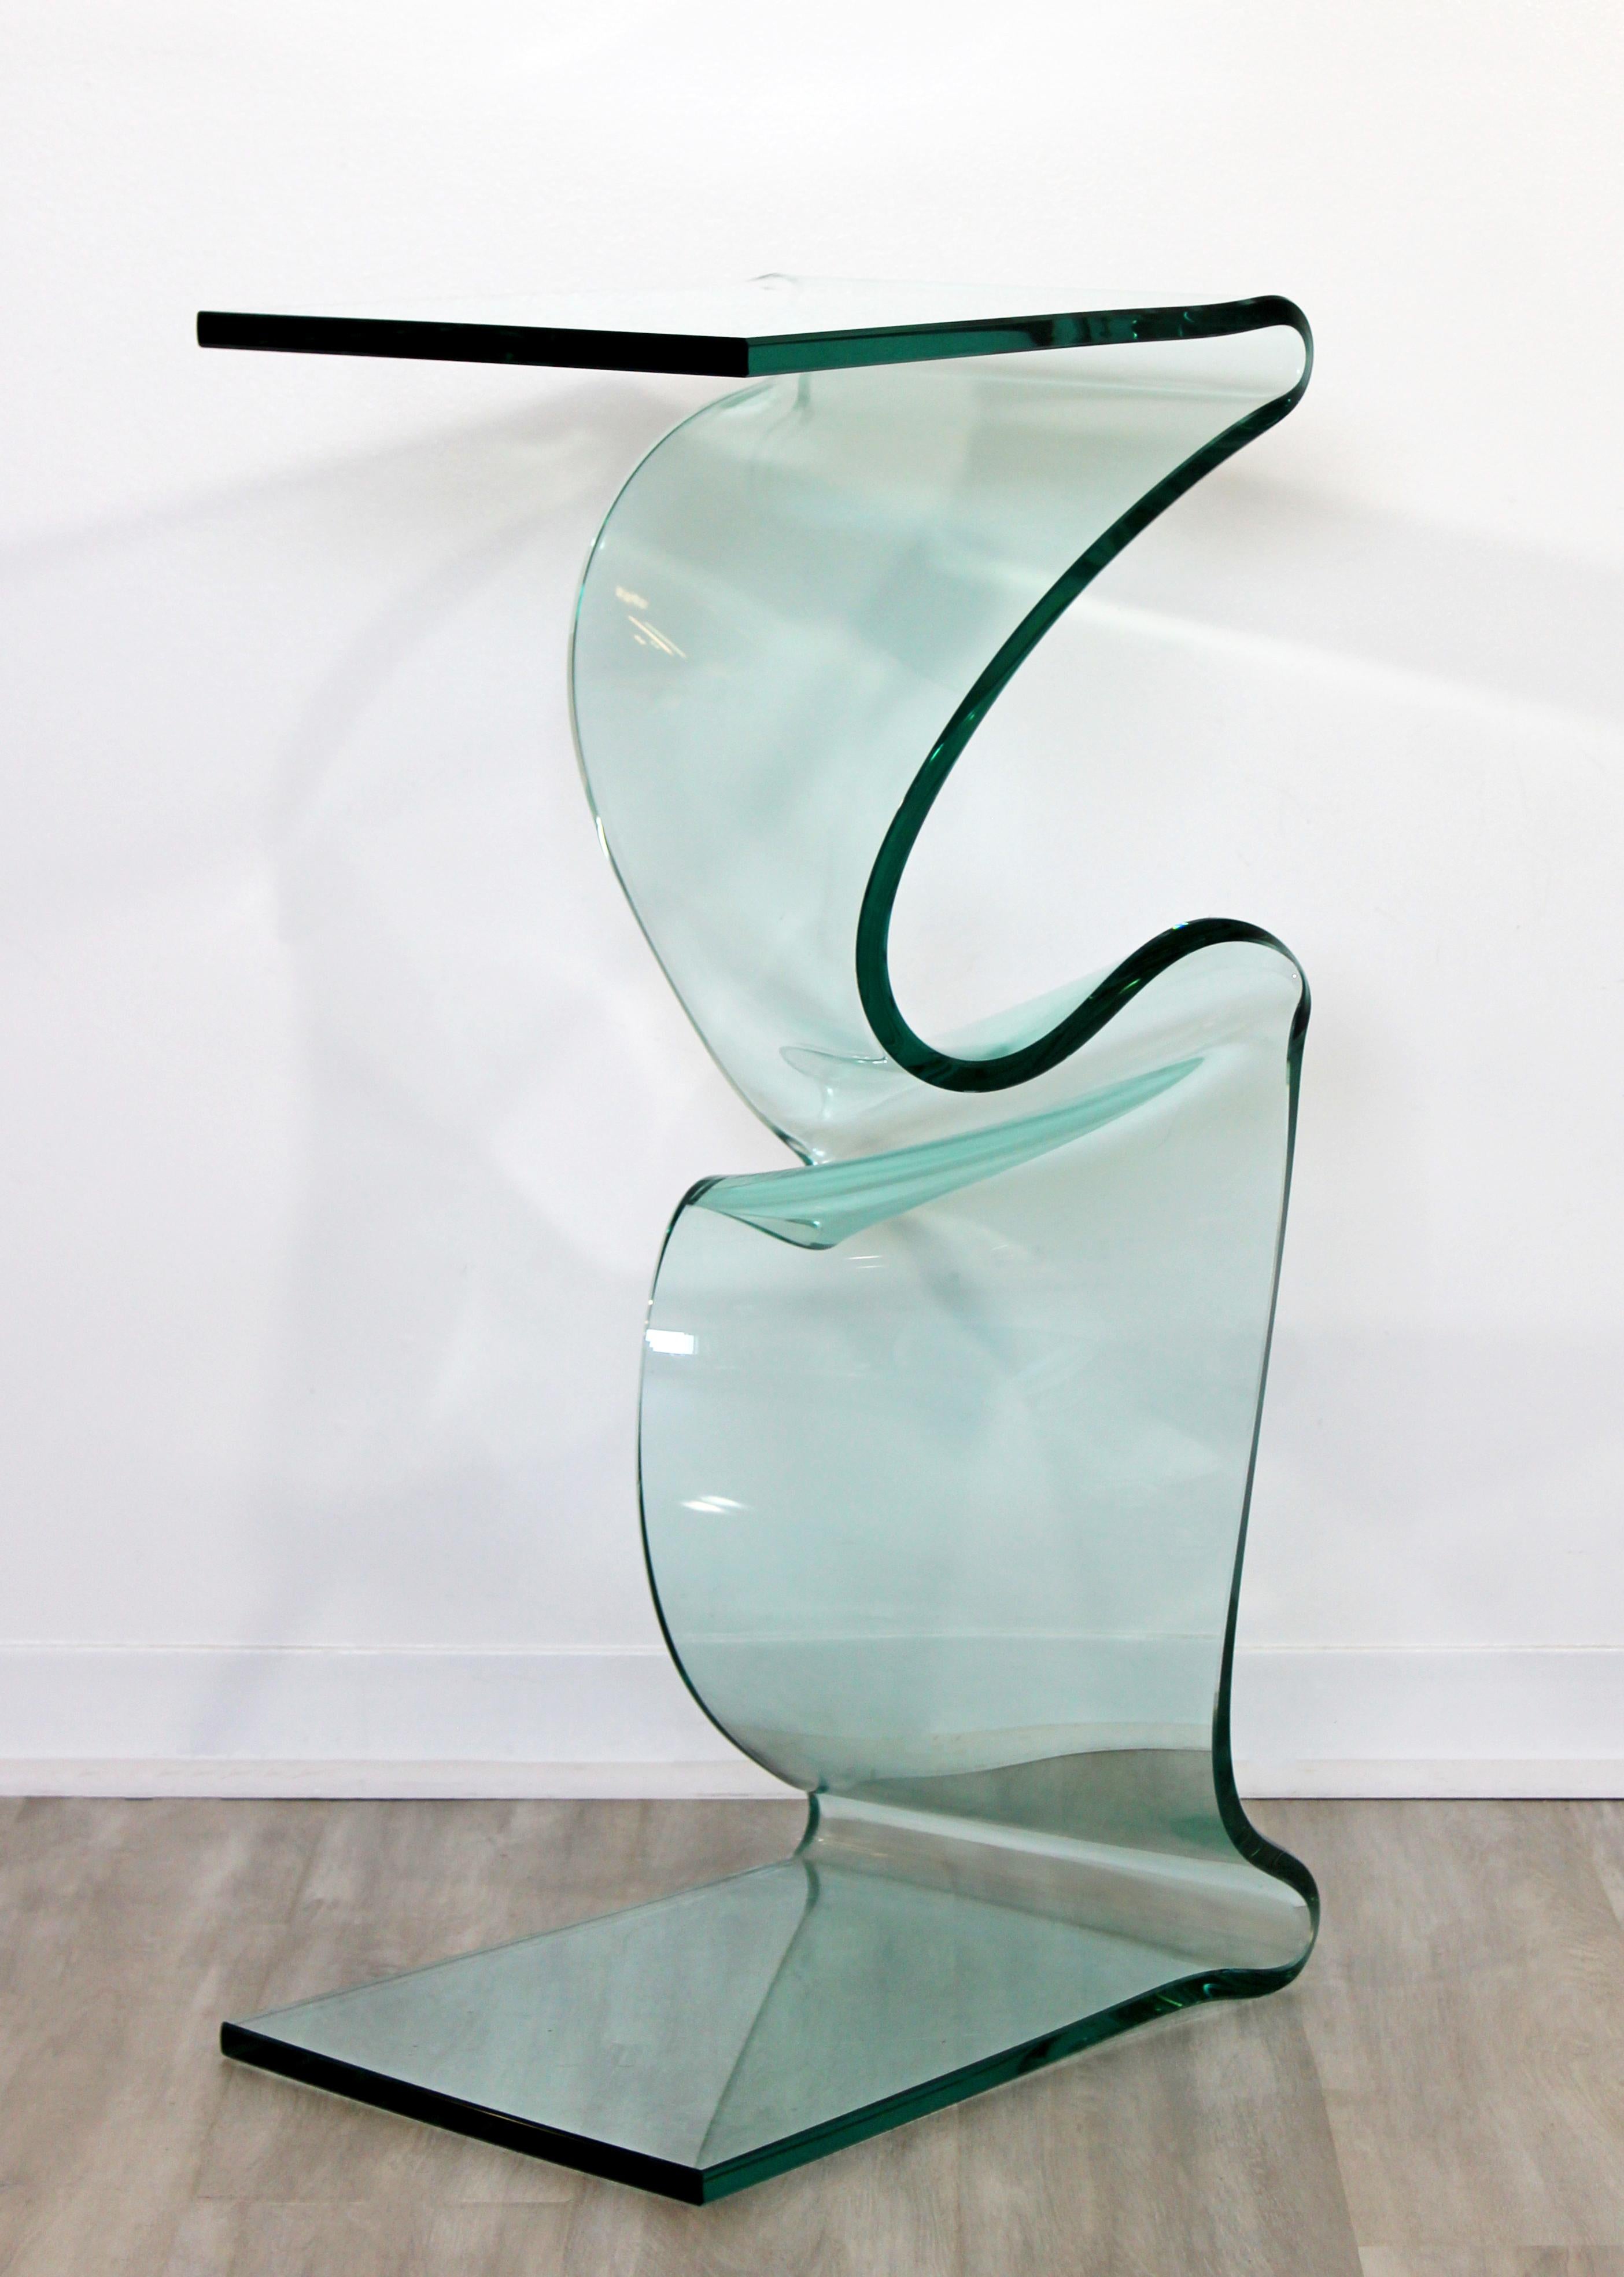 For your consideration is a stunningly unique, tall and asymmetrical, slump glass display pedestal, by Laurel Fyfe, circa 1980s. In excellent condition. The dimensions are 20